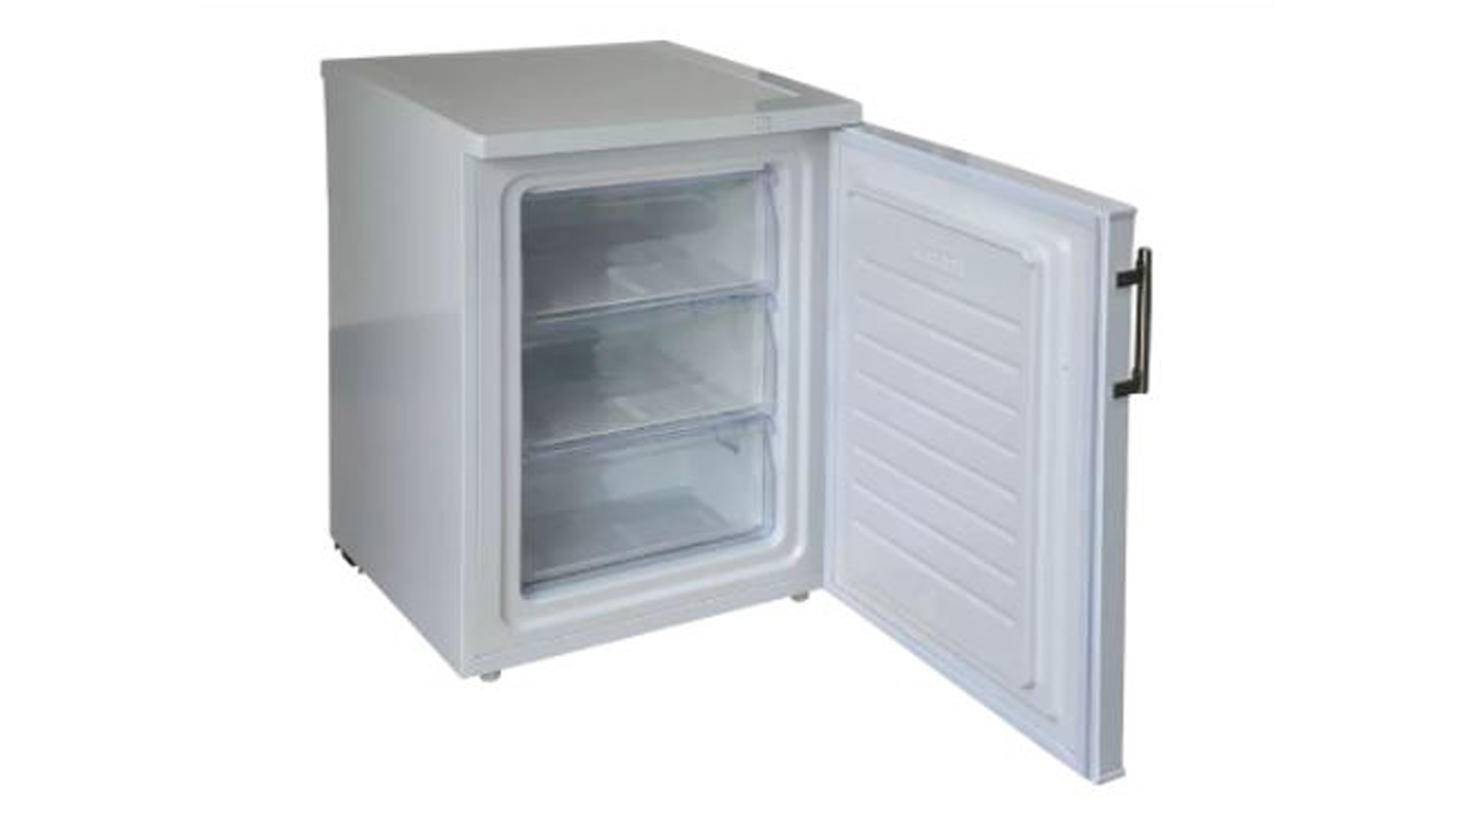 The Amica freezer is perfect for a single household.